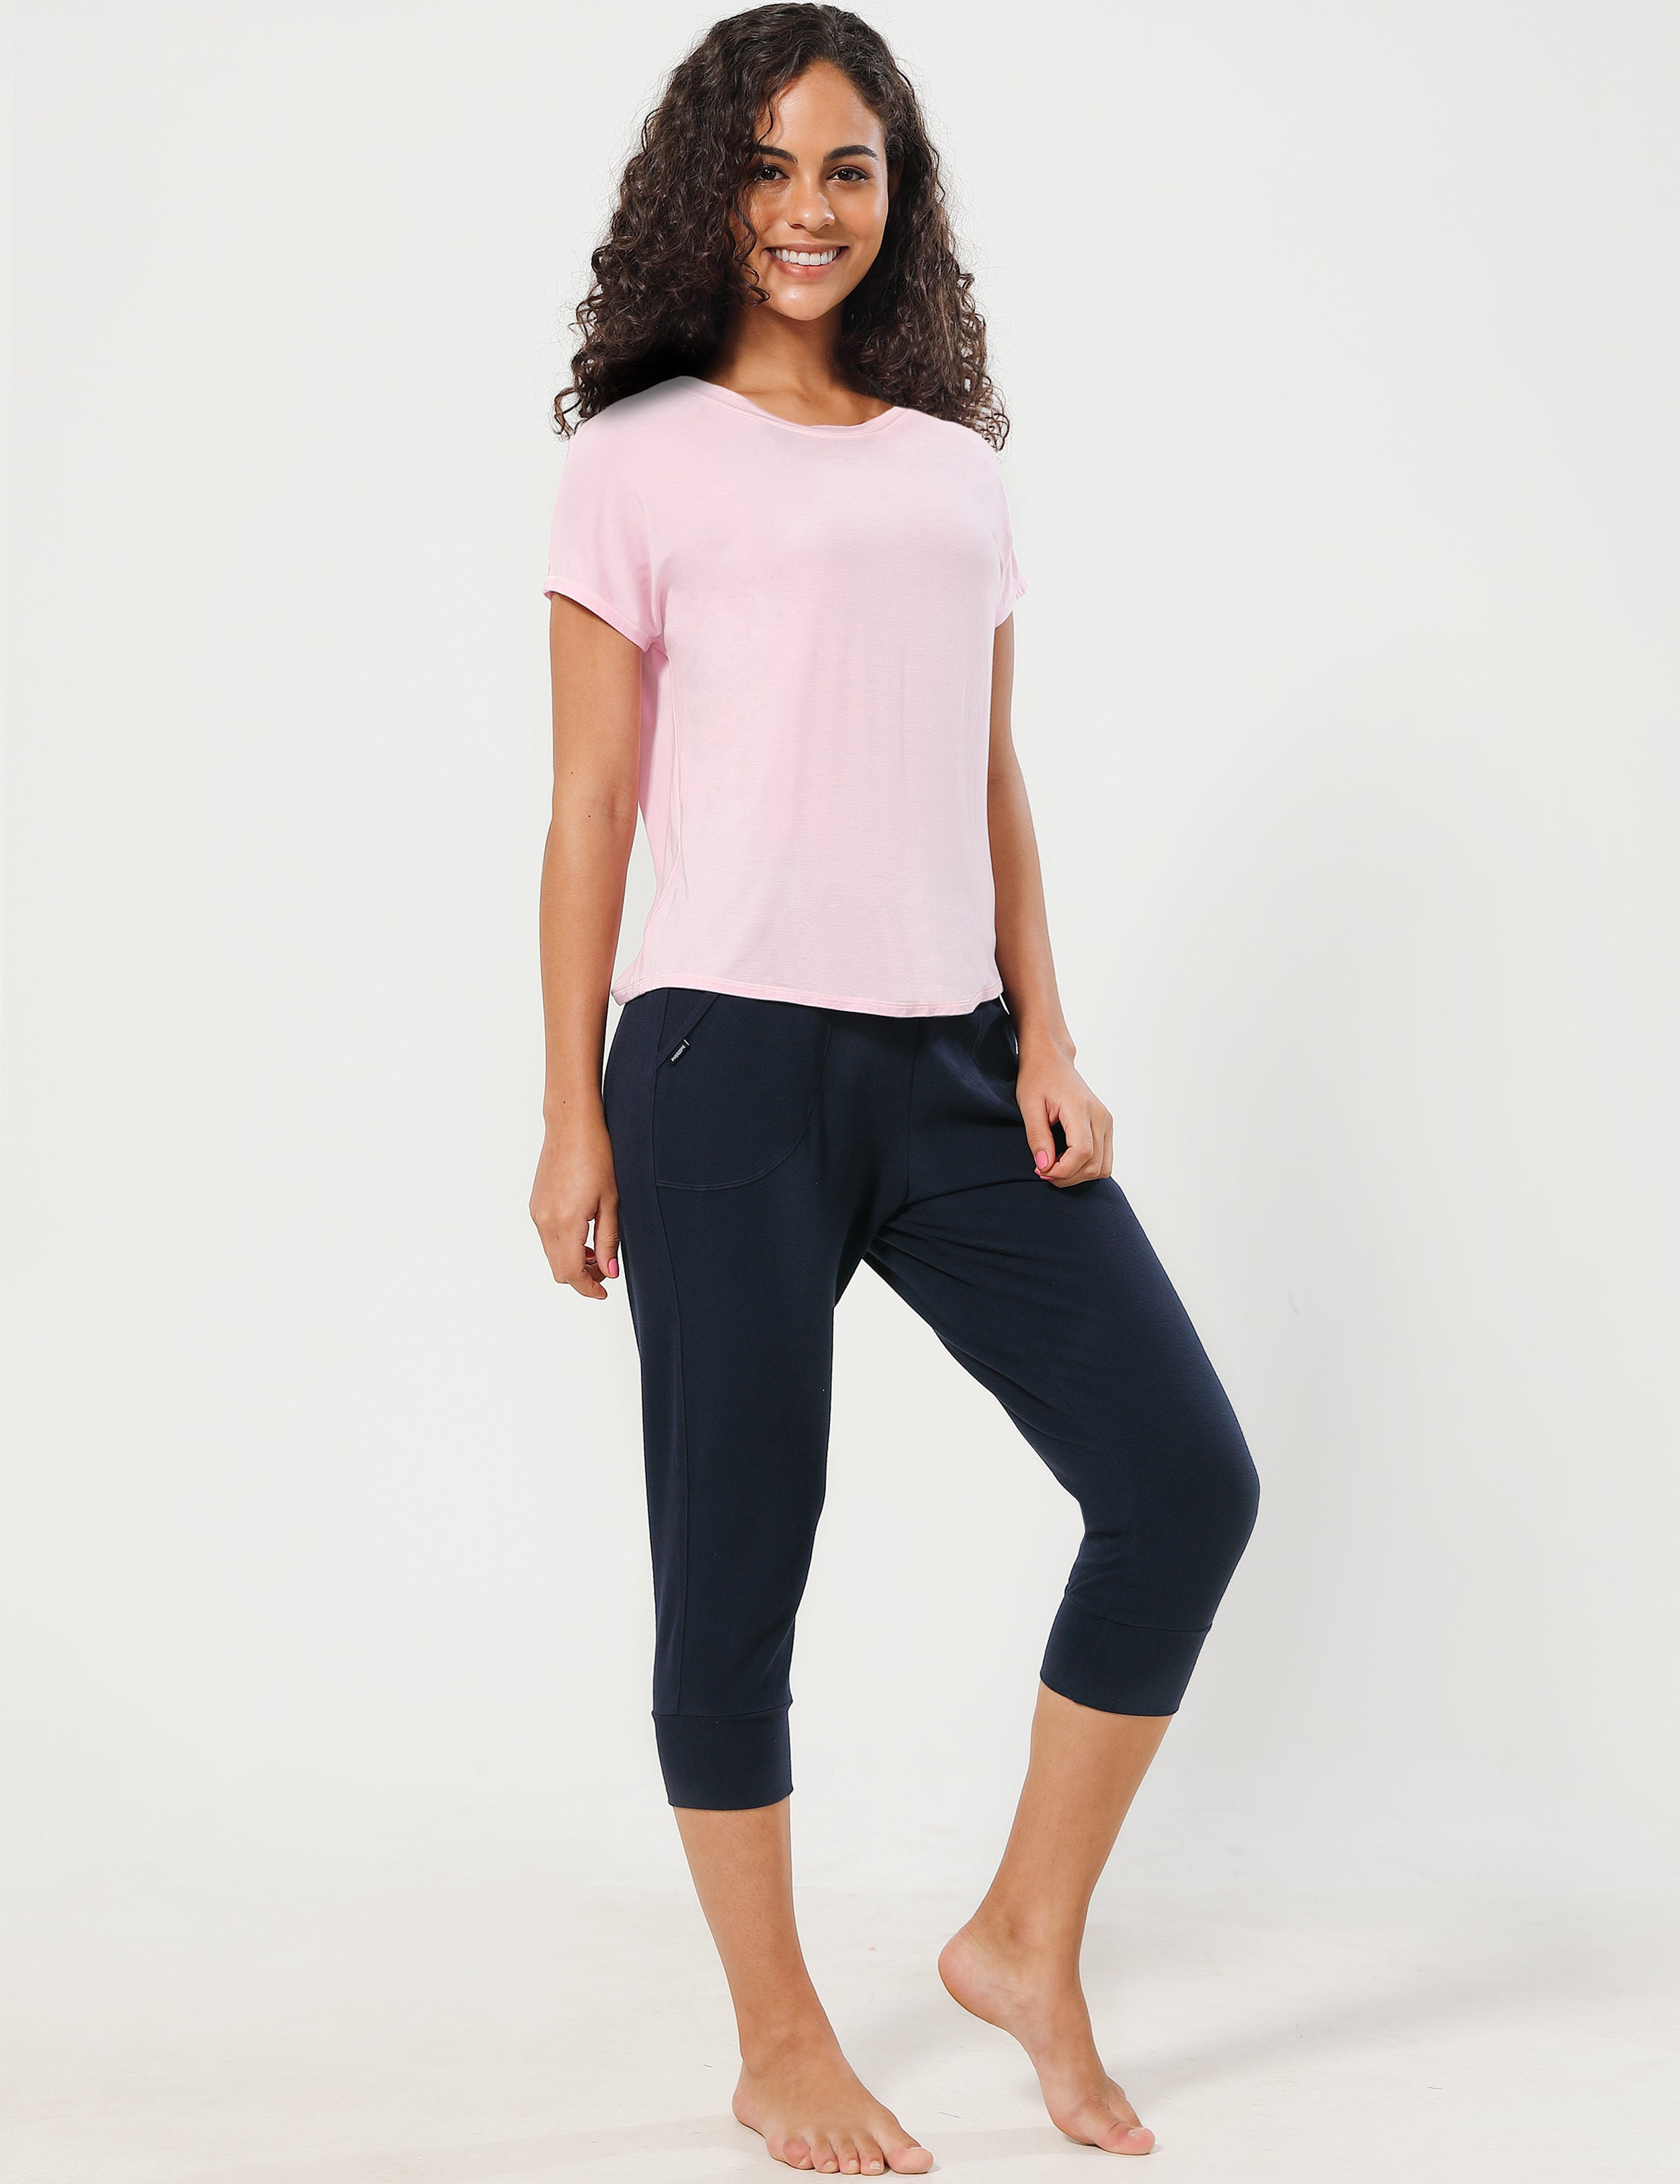 Hip Length Short Sleeve Shirt lightpink 93%Modal/7%Spandex Designed for Running Classic Fit, Hip Length An easy fit that floats away from your body Sits below the waistband for moderate, everyday coverage Lightweight, elastic, strong fabric for moisture absorption and perspiration, sports and fitness clothing.